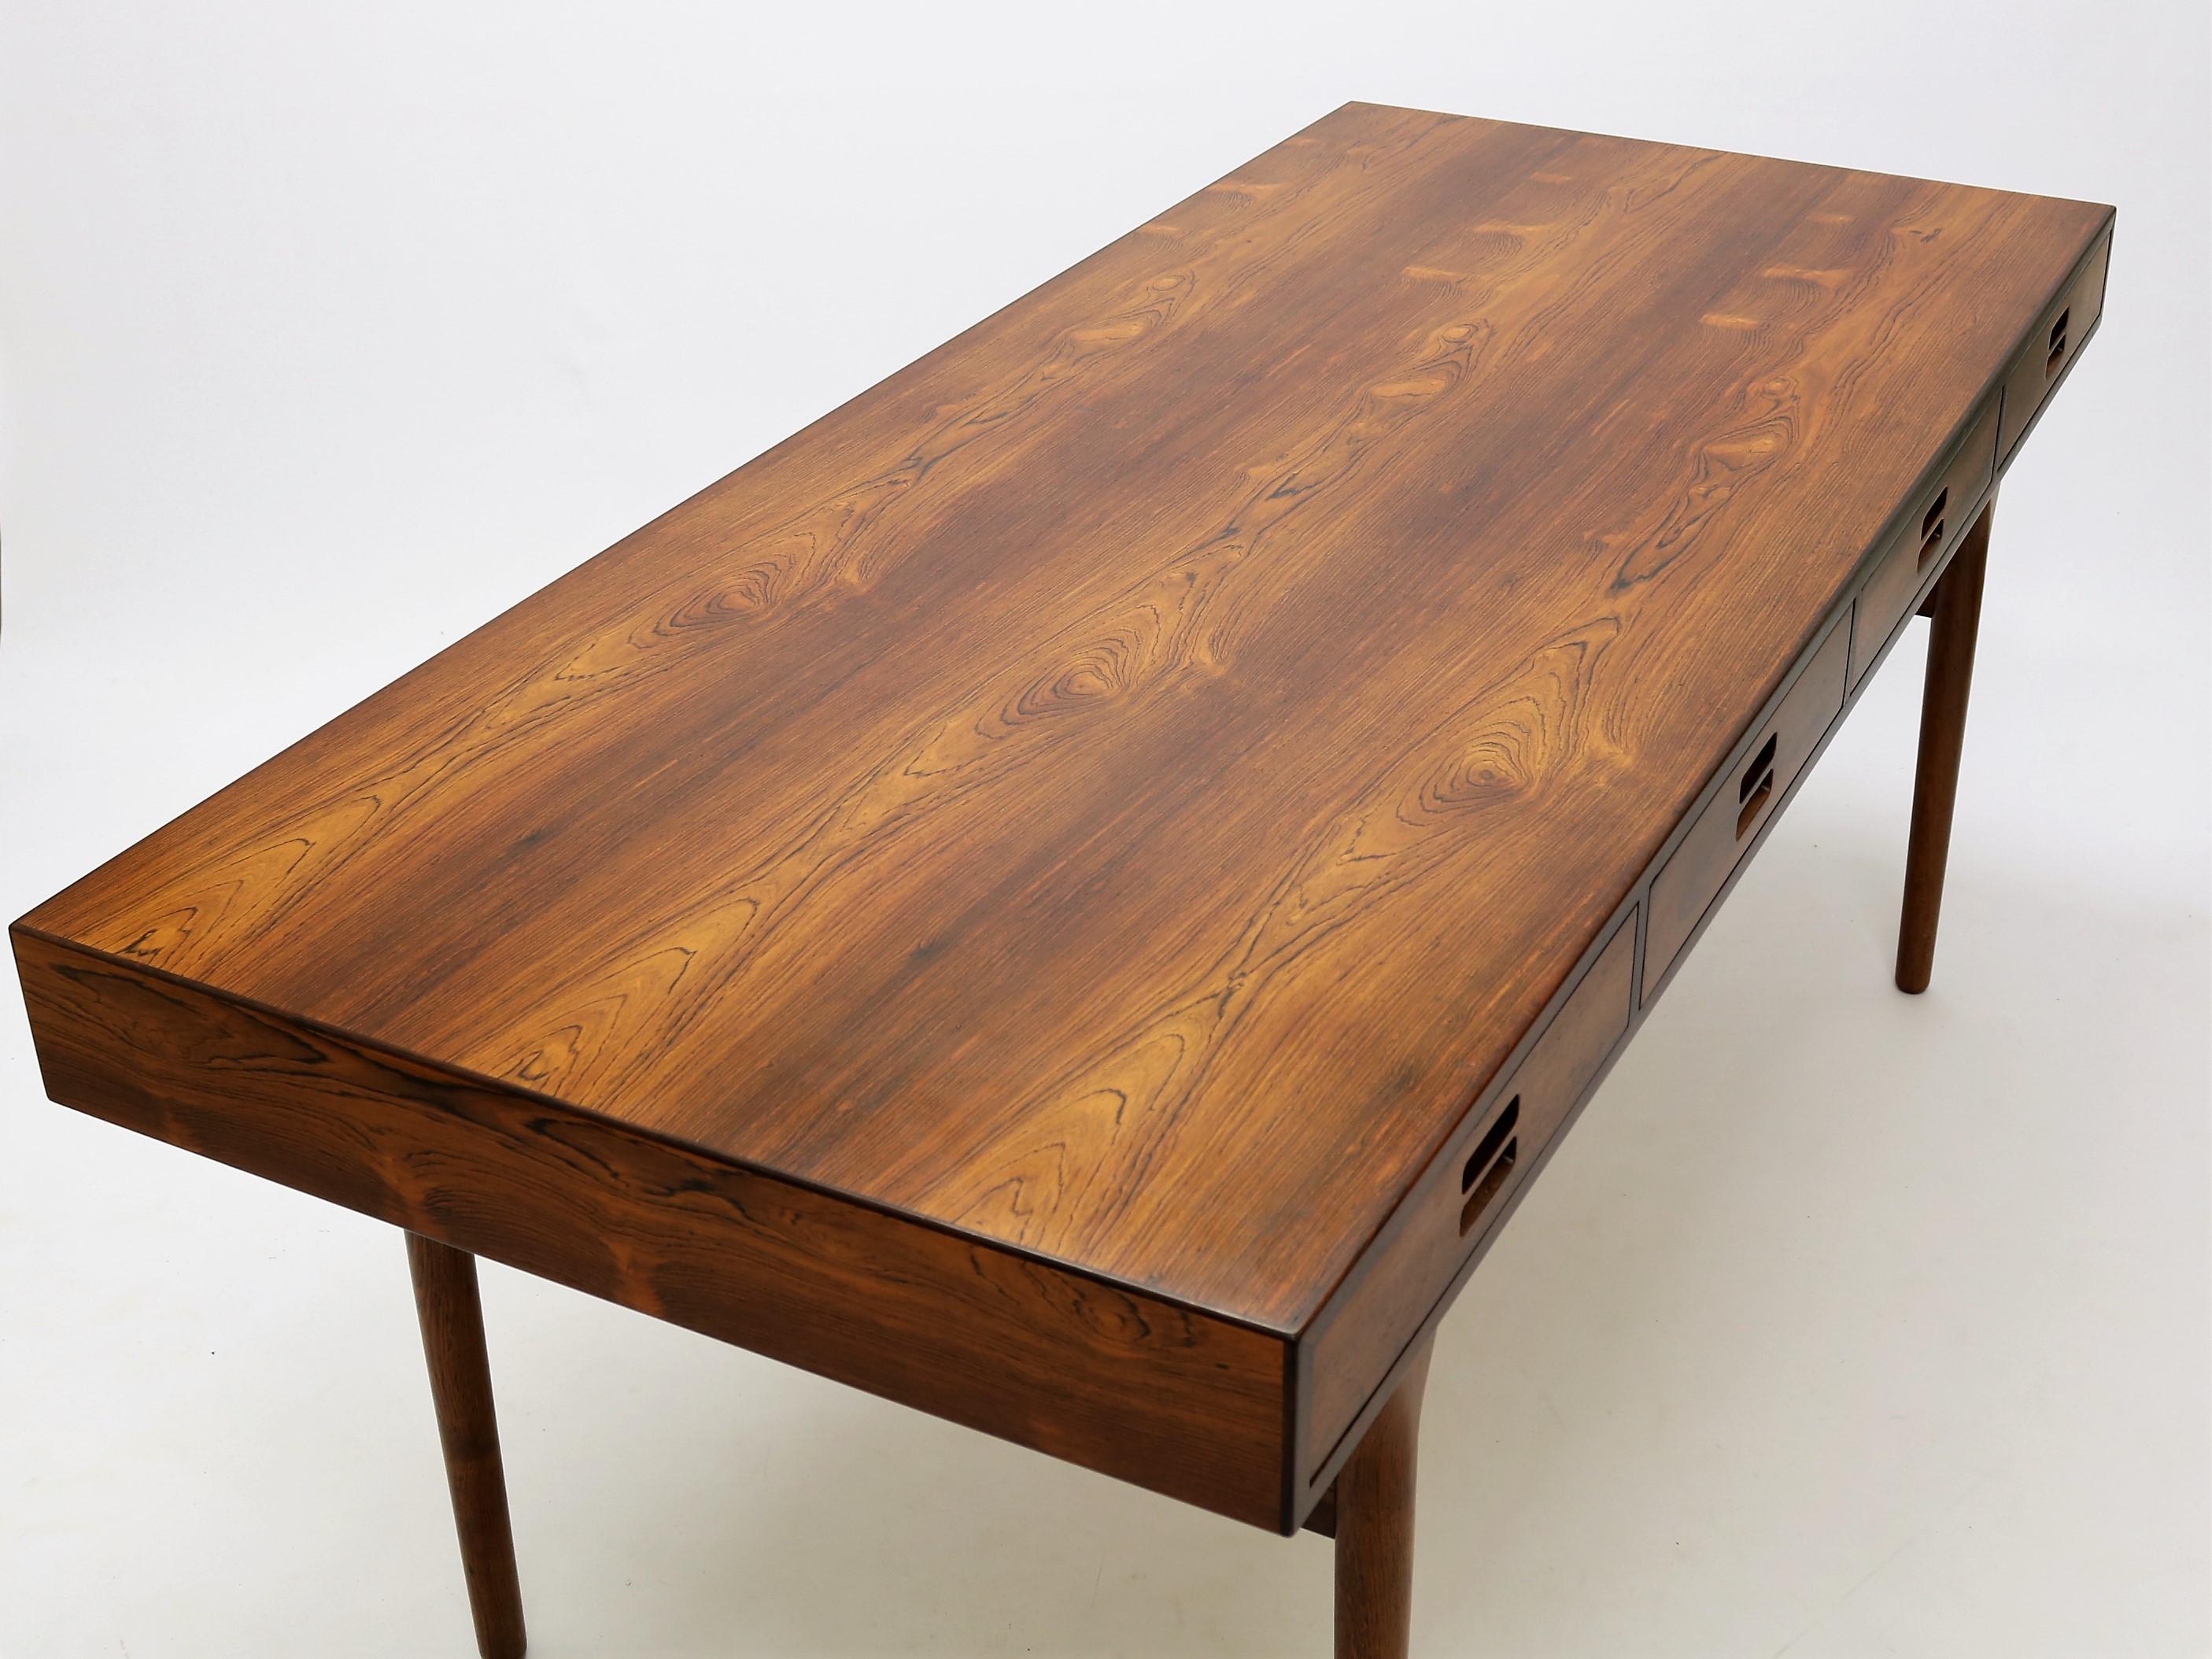 Nanna Ditzel, Office Desk in Rosewood with 4 Drawers (Dänisch)